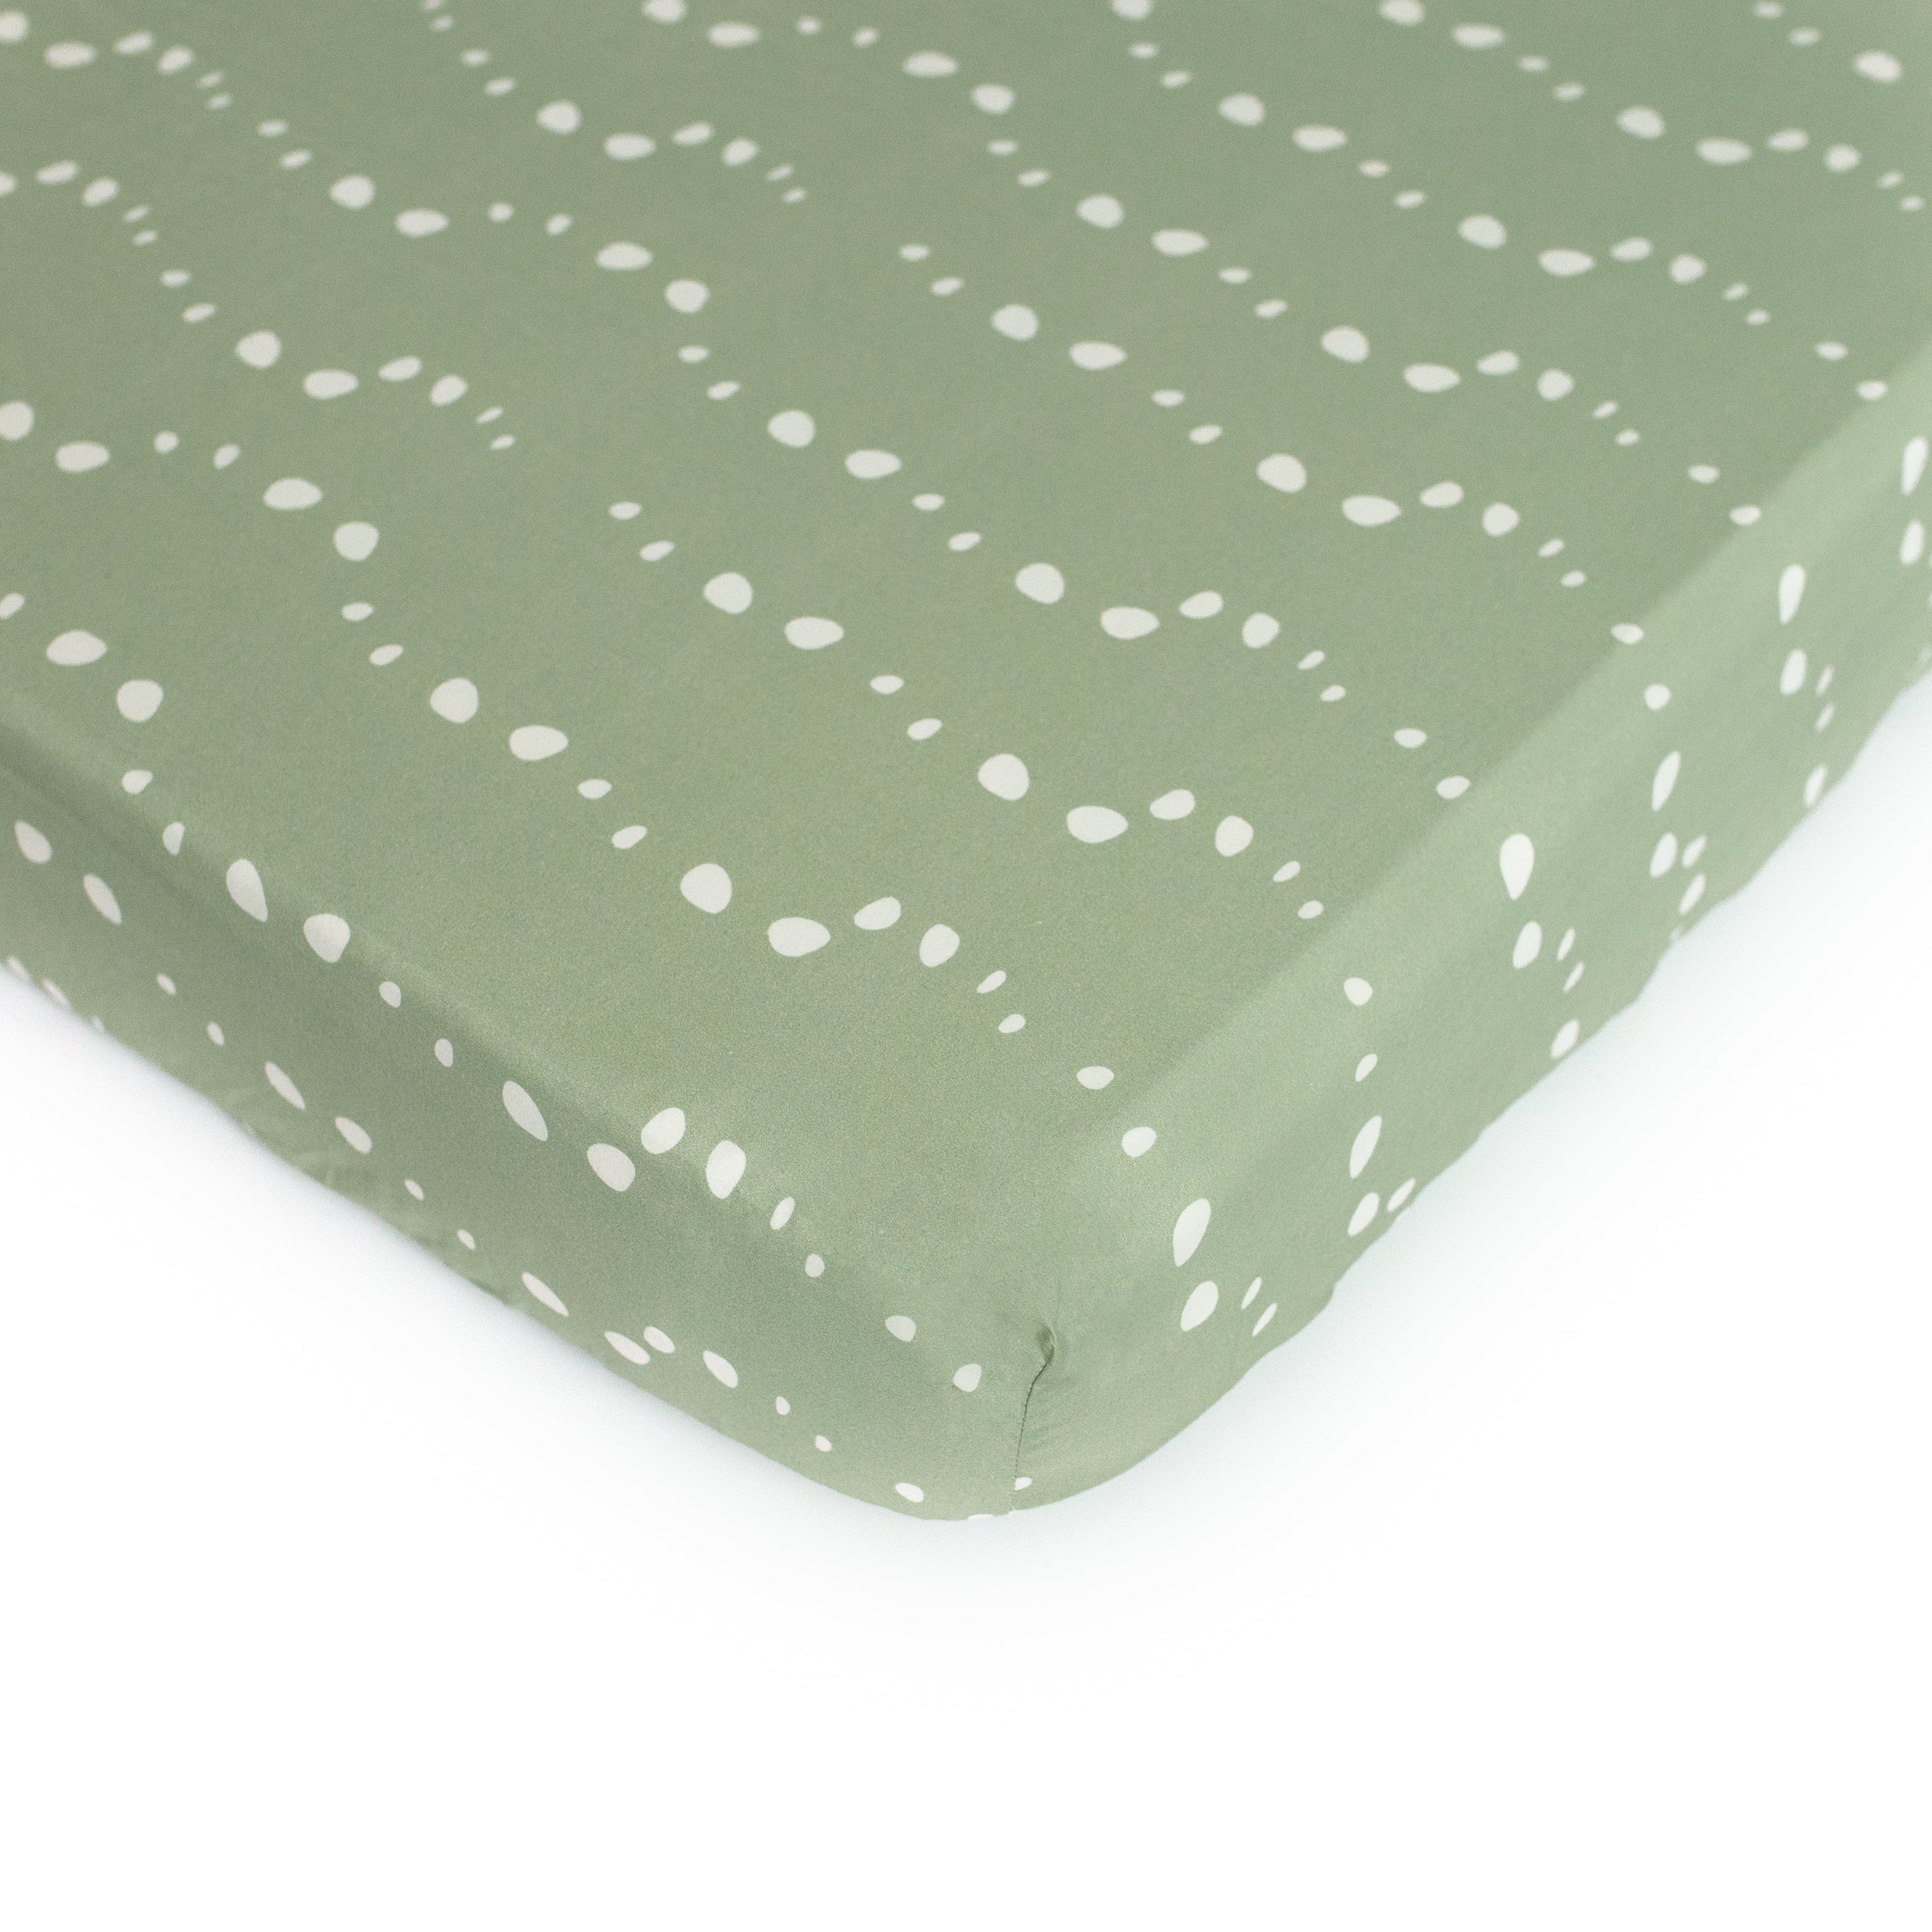 An Oolie organic cotton crib sheet with the sage stones print, a soft green color with white bubbles or irregular stone shapes.